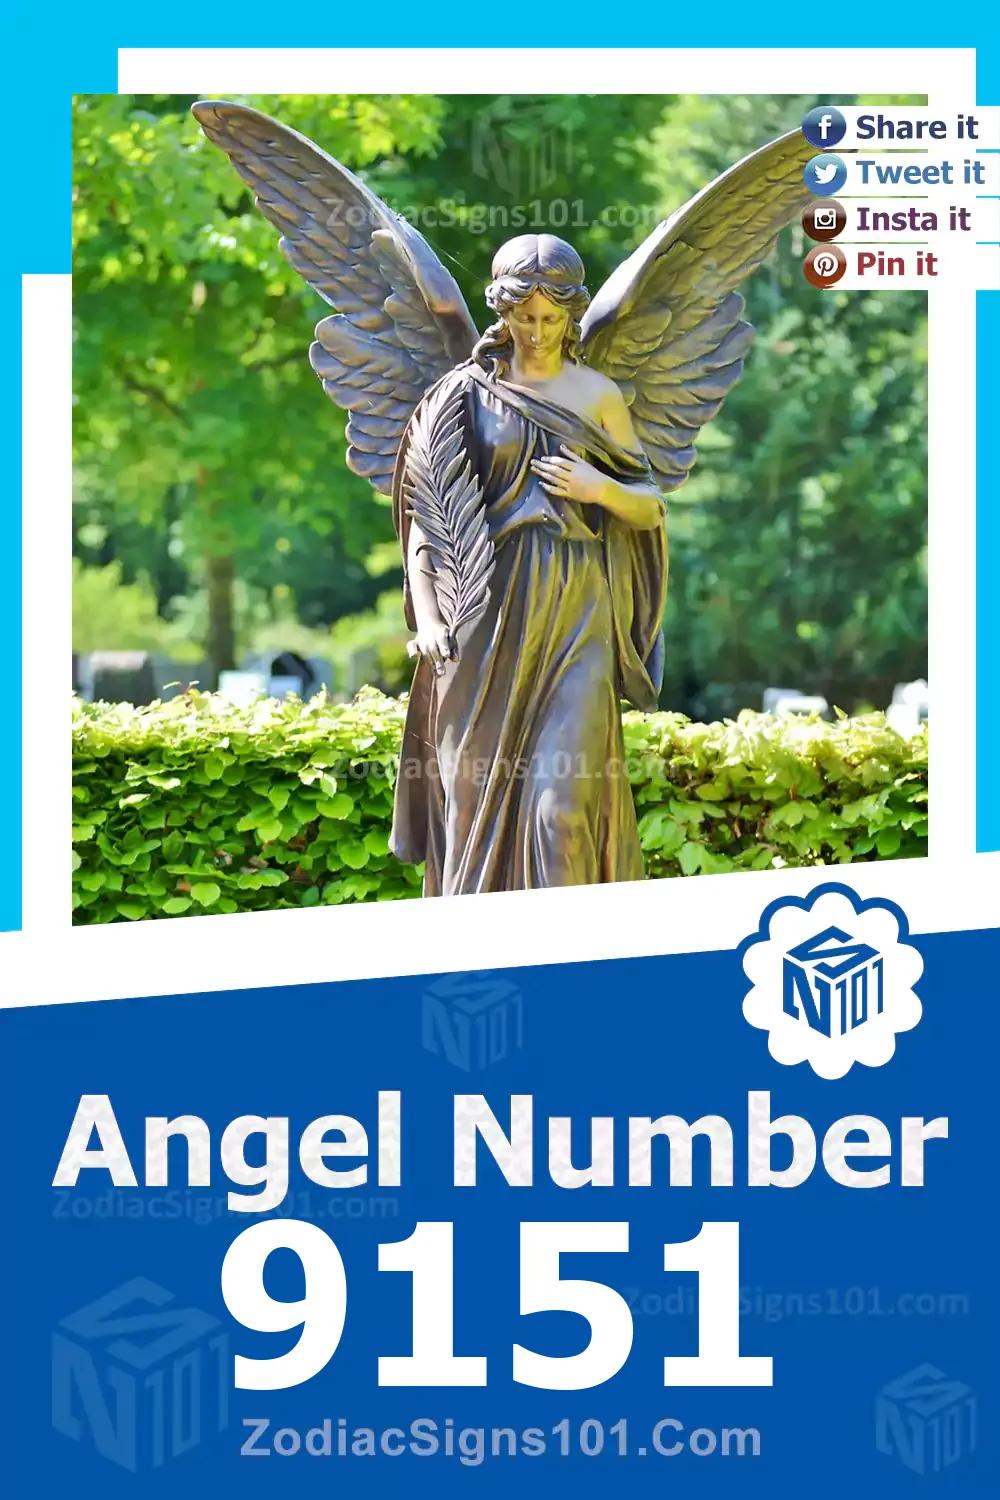 9151 Angel Number Meaning